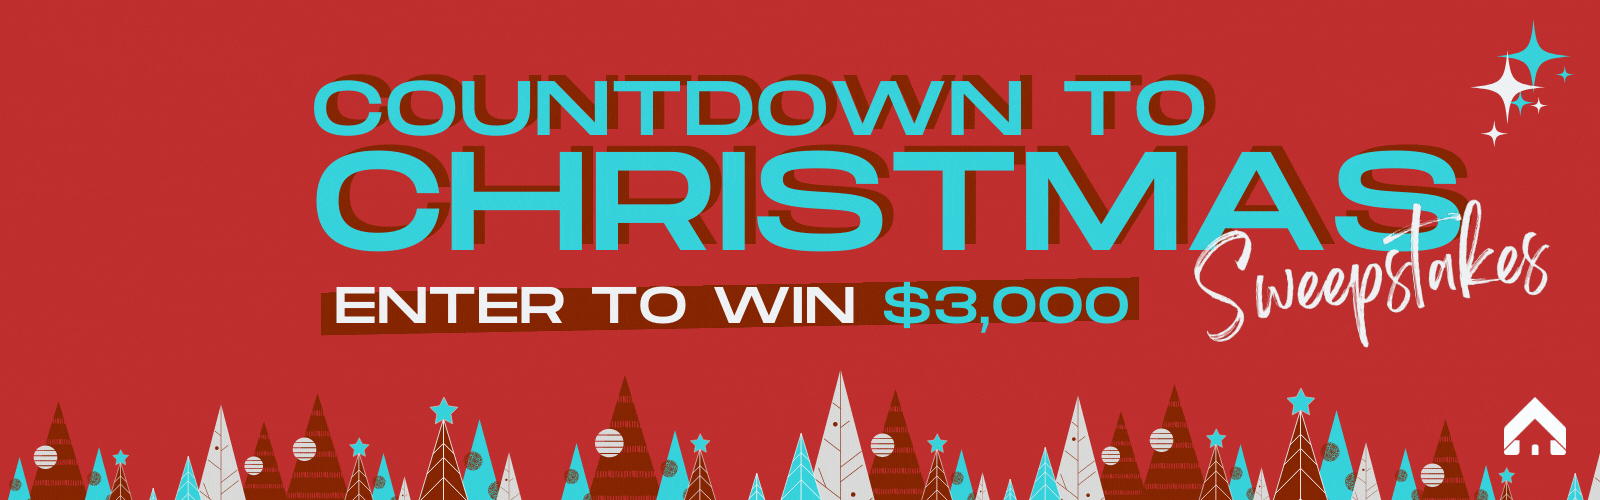 Countdown to Christmas Giveaway Final for real